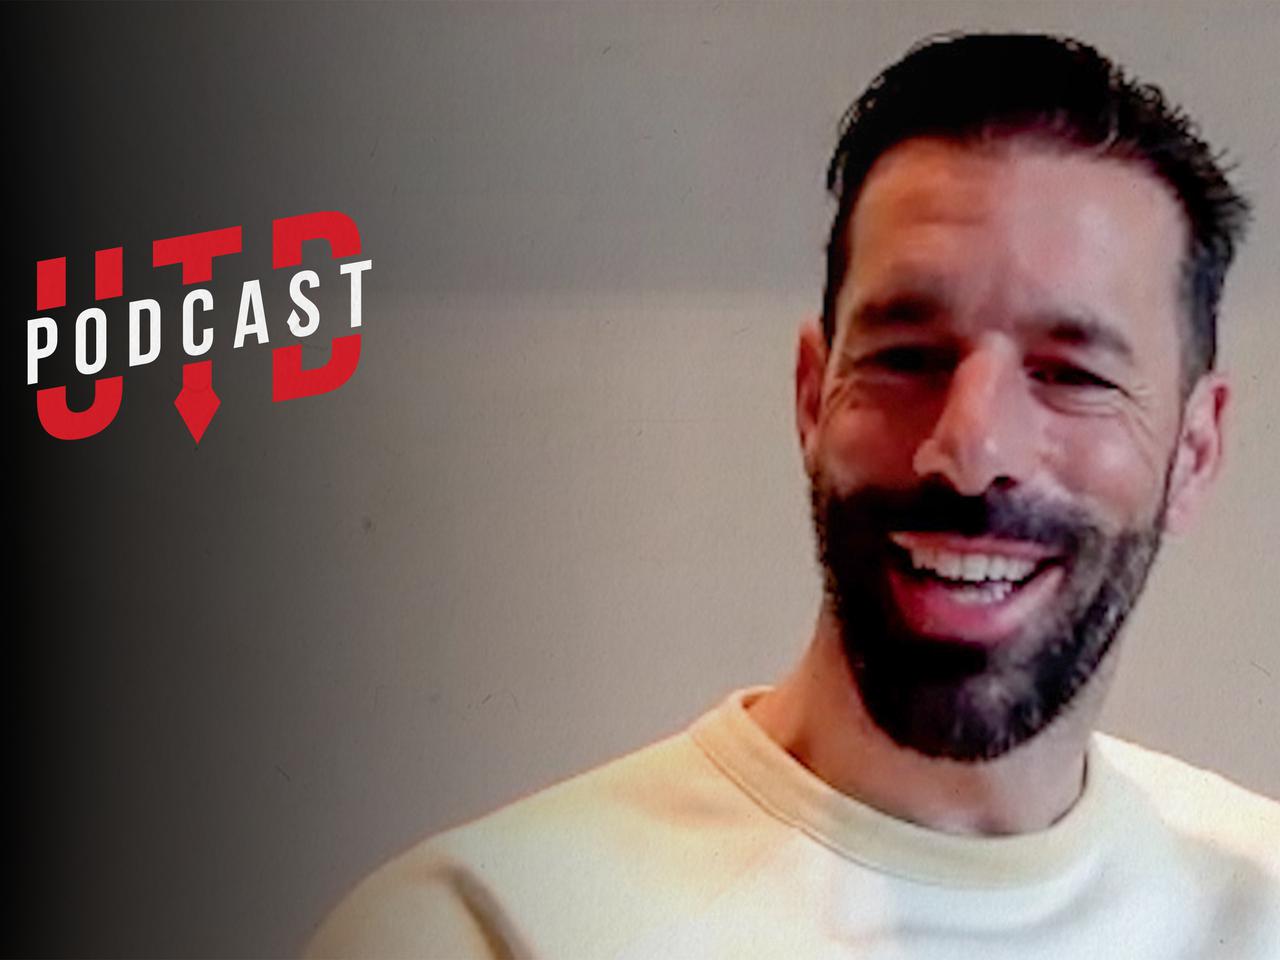 Van Nistelrooy on fans and prolific first season in UTD Podcast